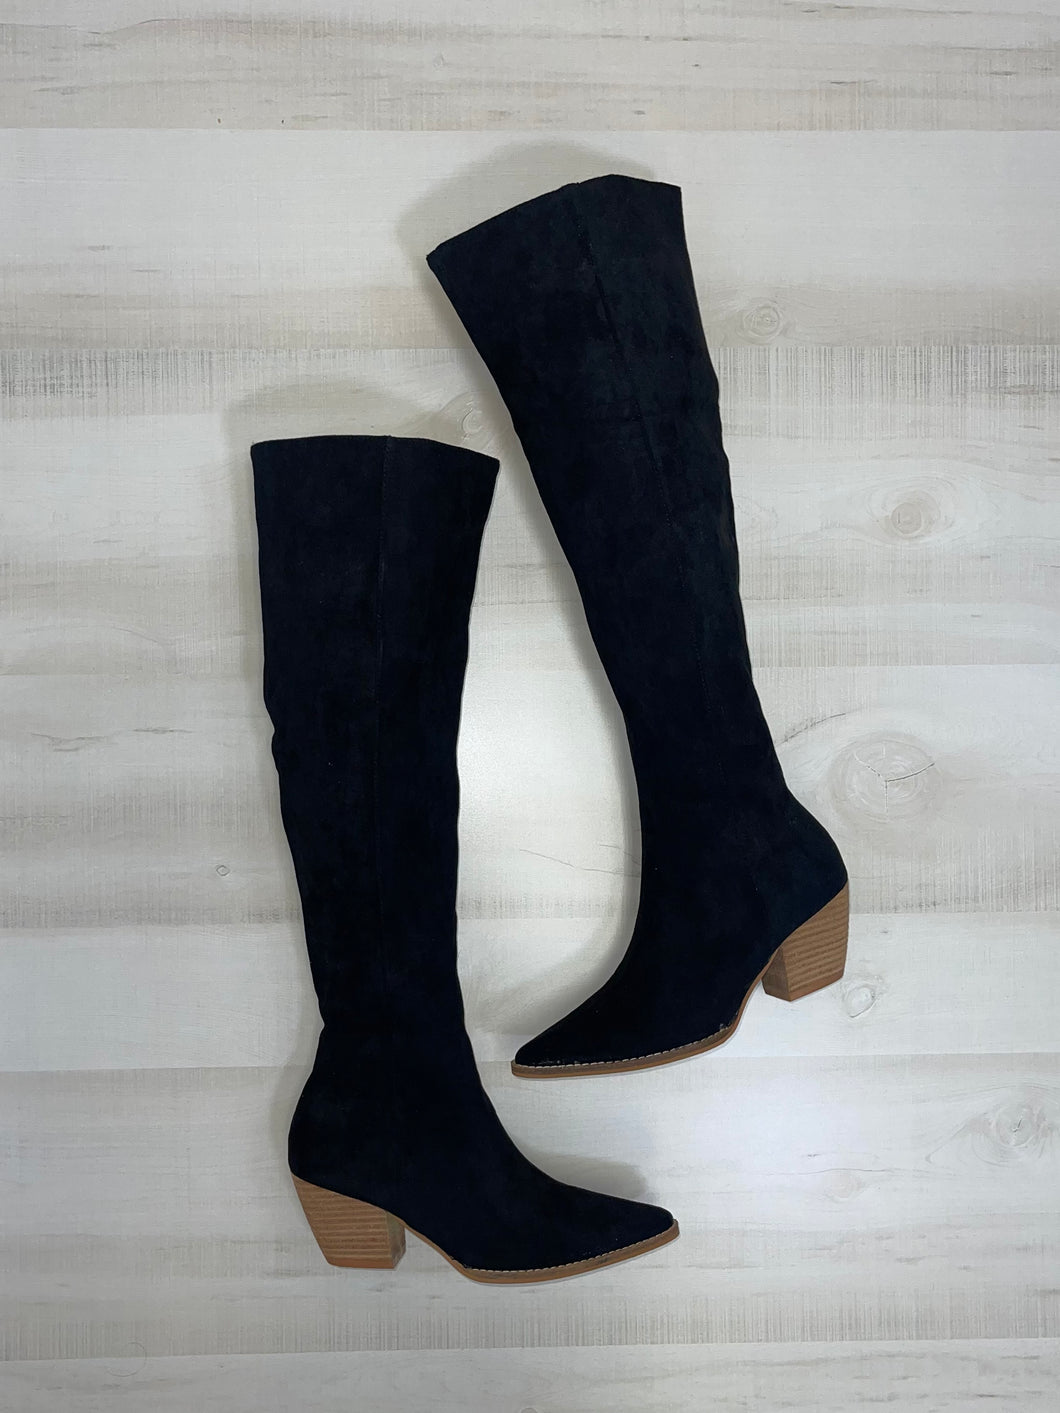 Black Suede Over the Knee Boots